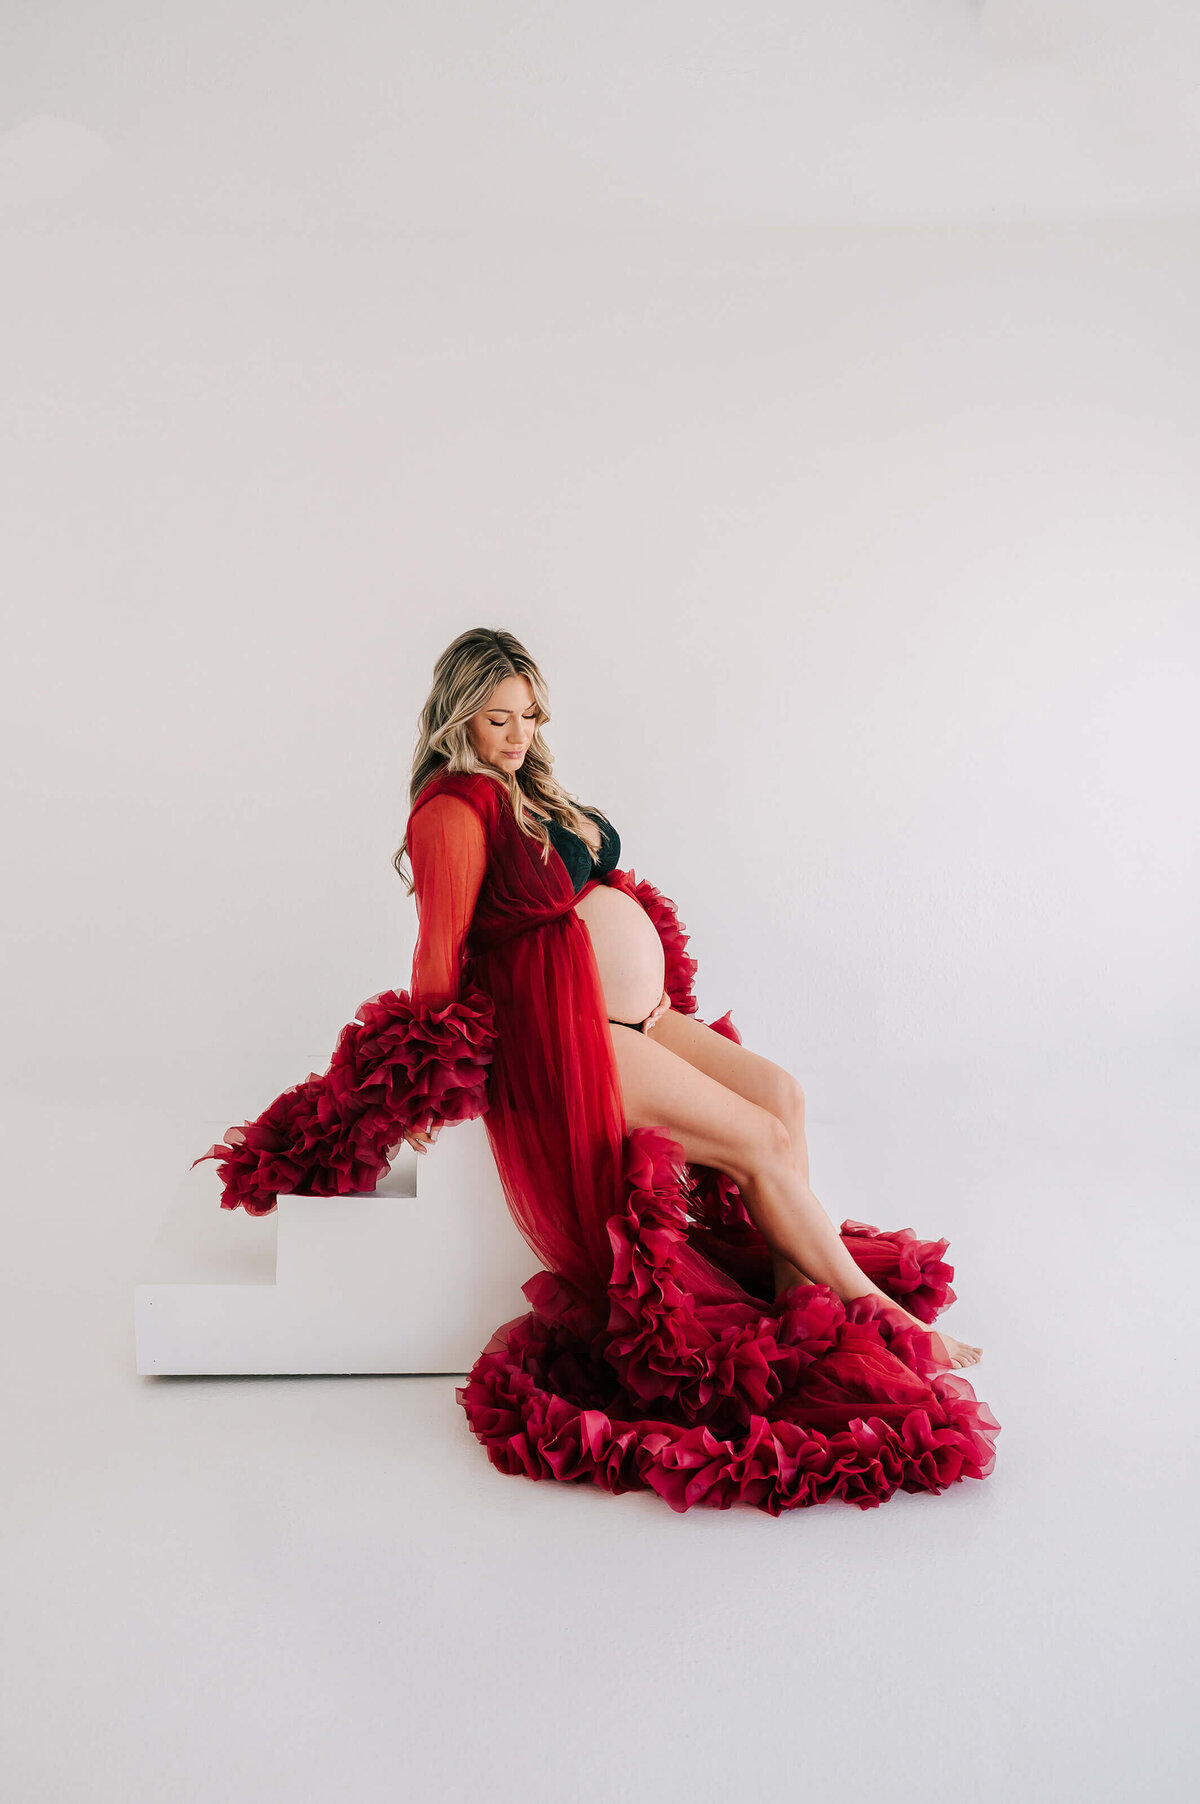 Branson Missouri maternity photographer Jessica Kennedy of The XO Photography captures pregnant mom in red robe sitting on step